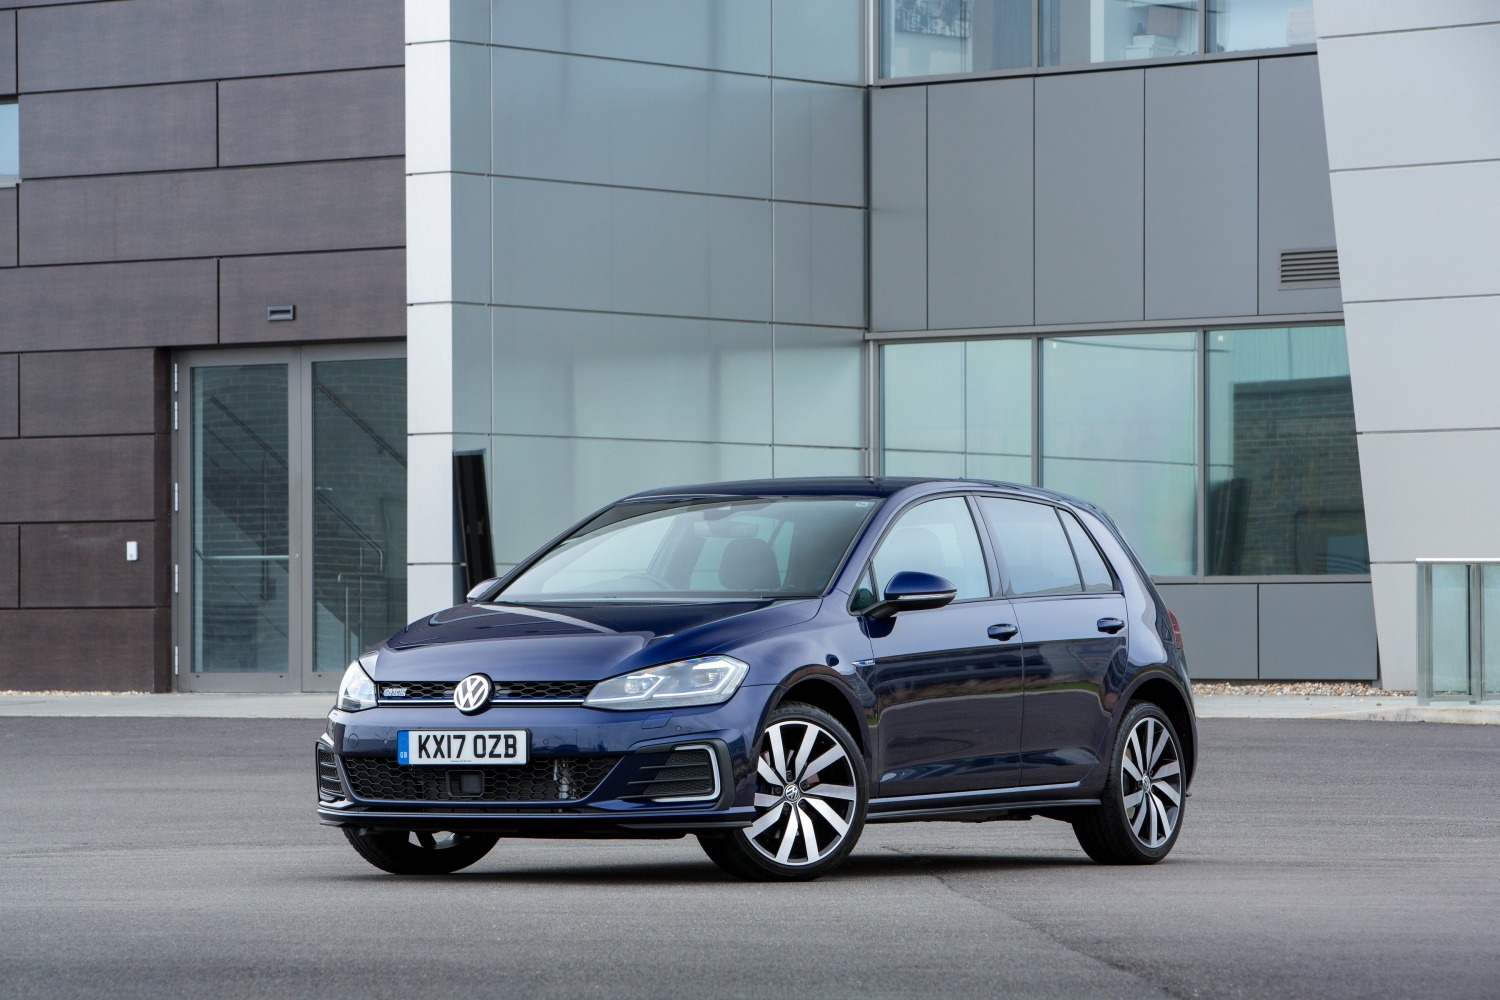 Volkswagen Golf named ‘Best Used Family Car’ at the Auto Express Used Car Awards